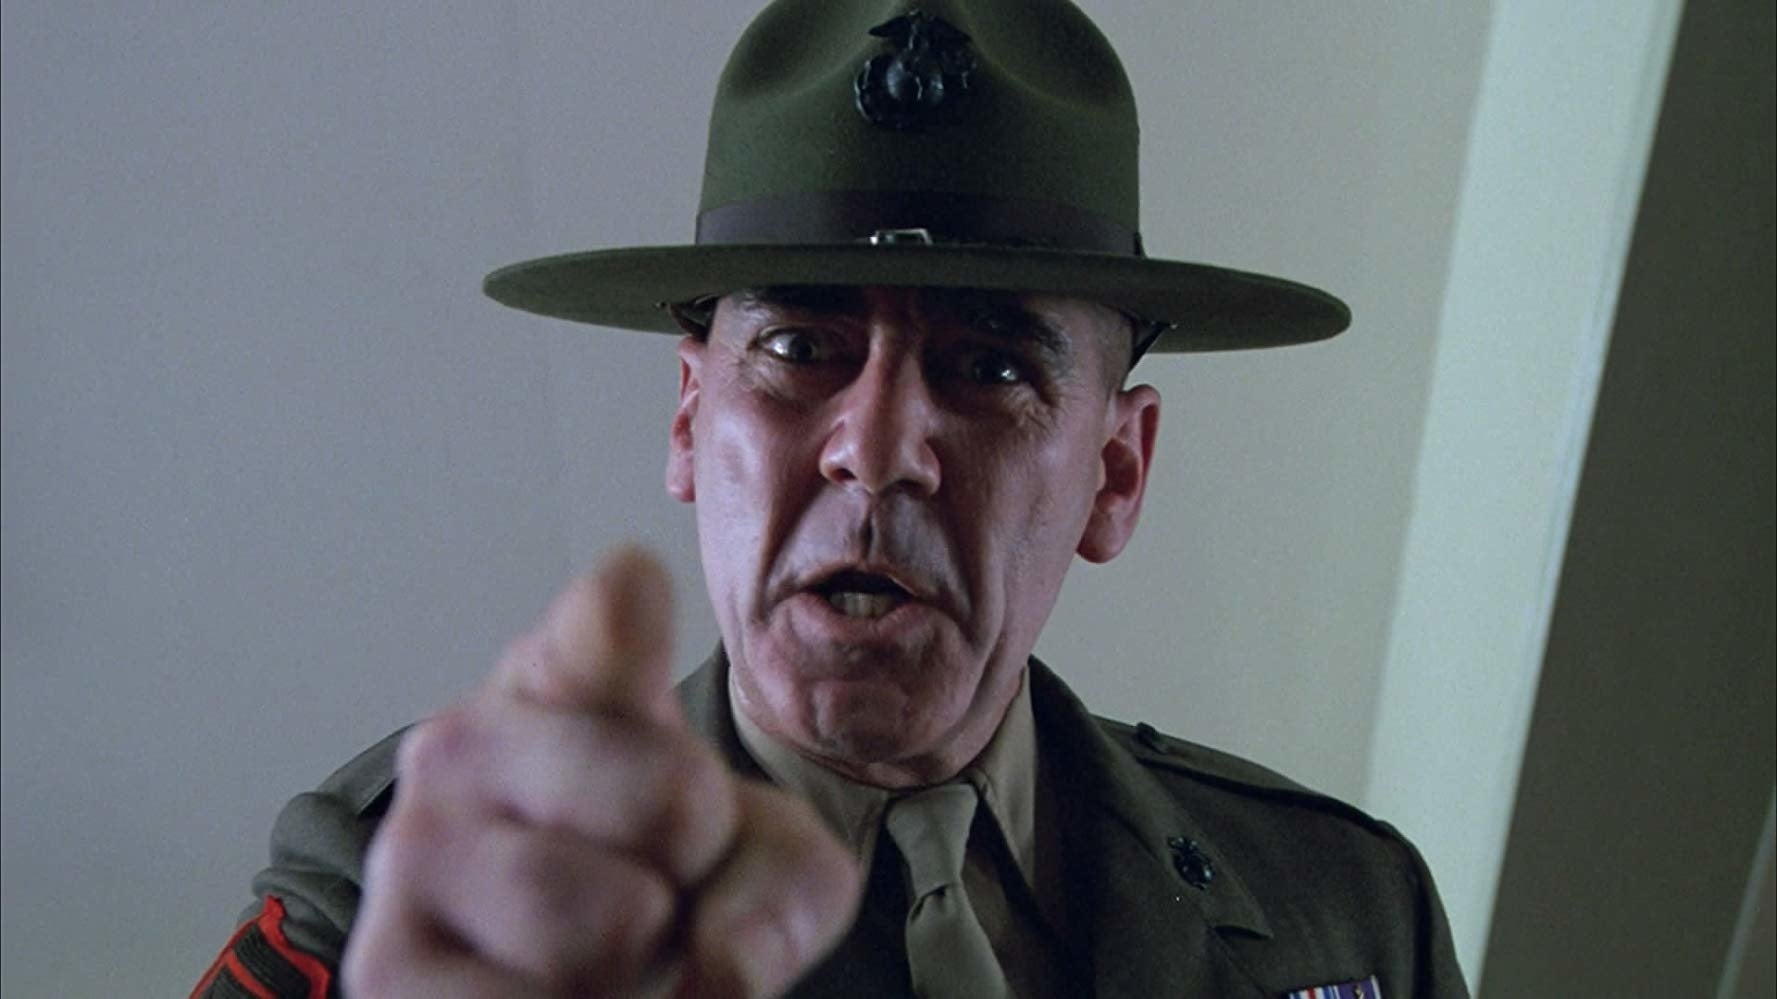 5 surprising facts about ‘Full Metal Jacket’ revealed by Pvt. Joker himself